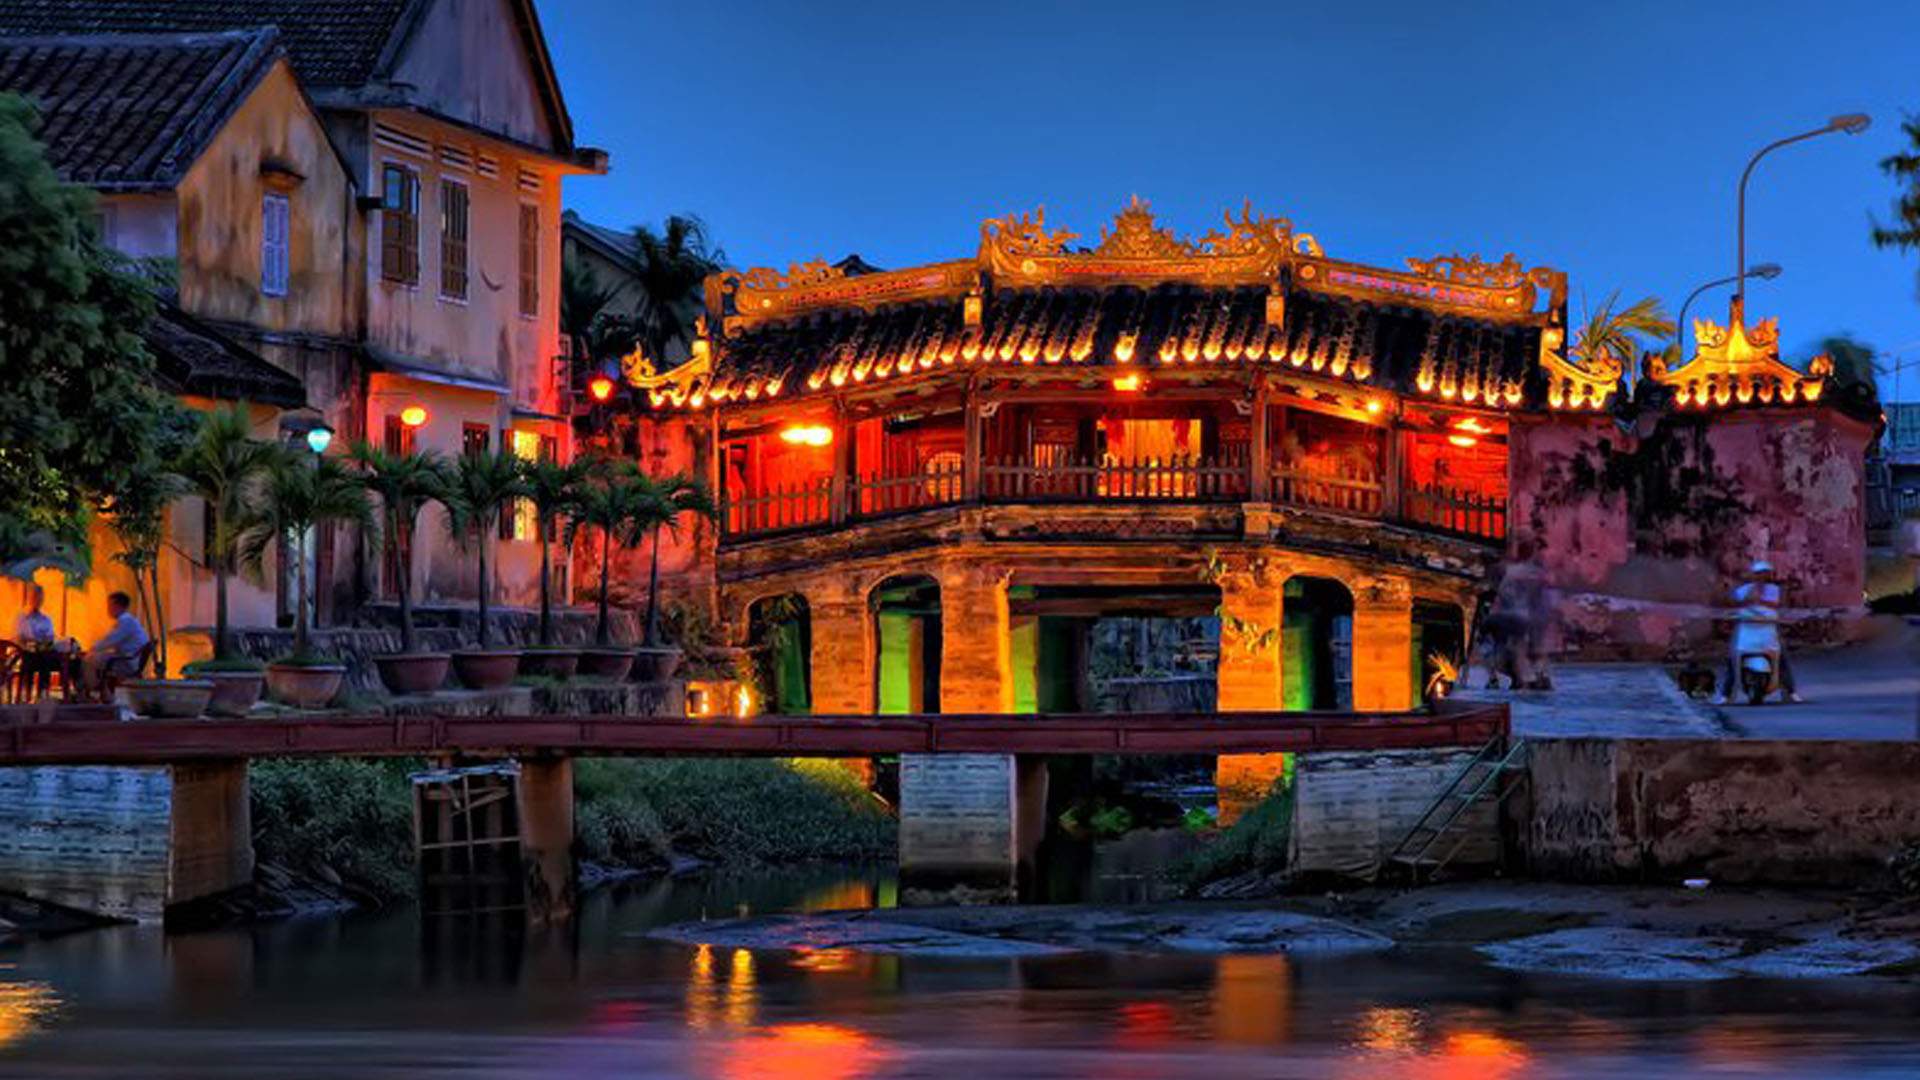 Hoi An one of 10 best cities in Asia